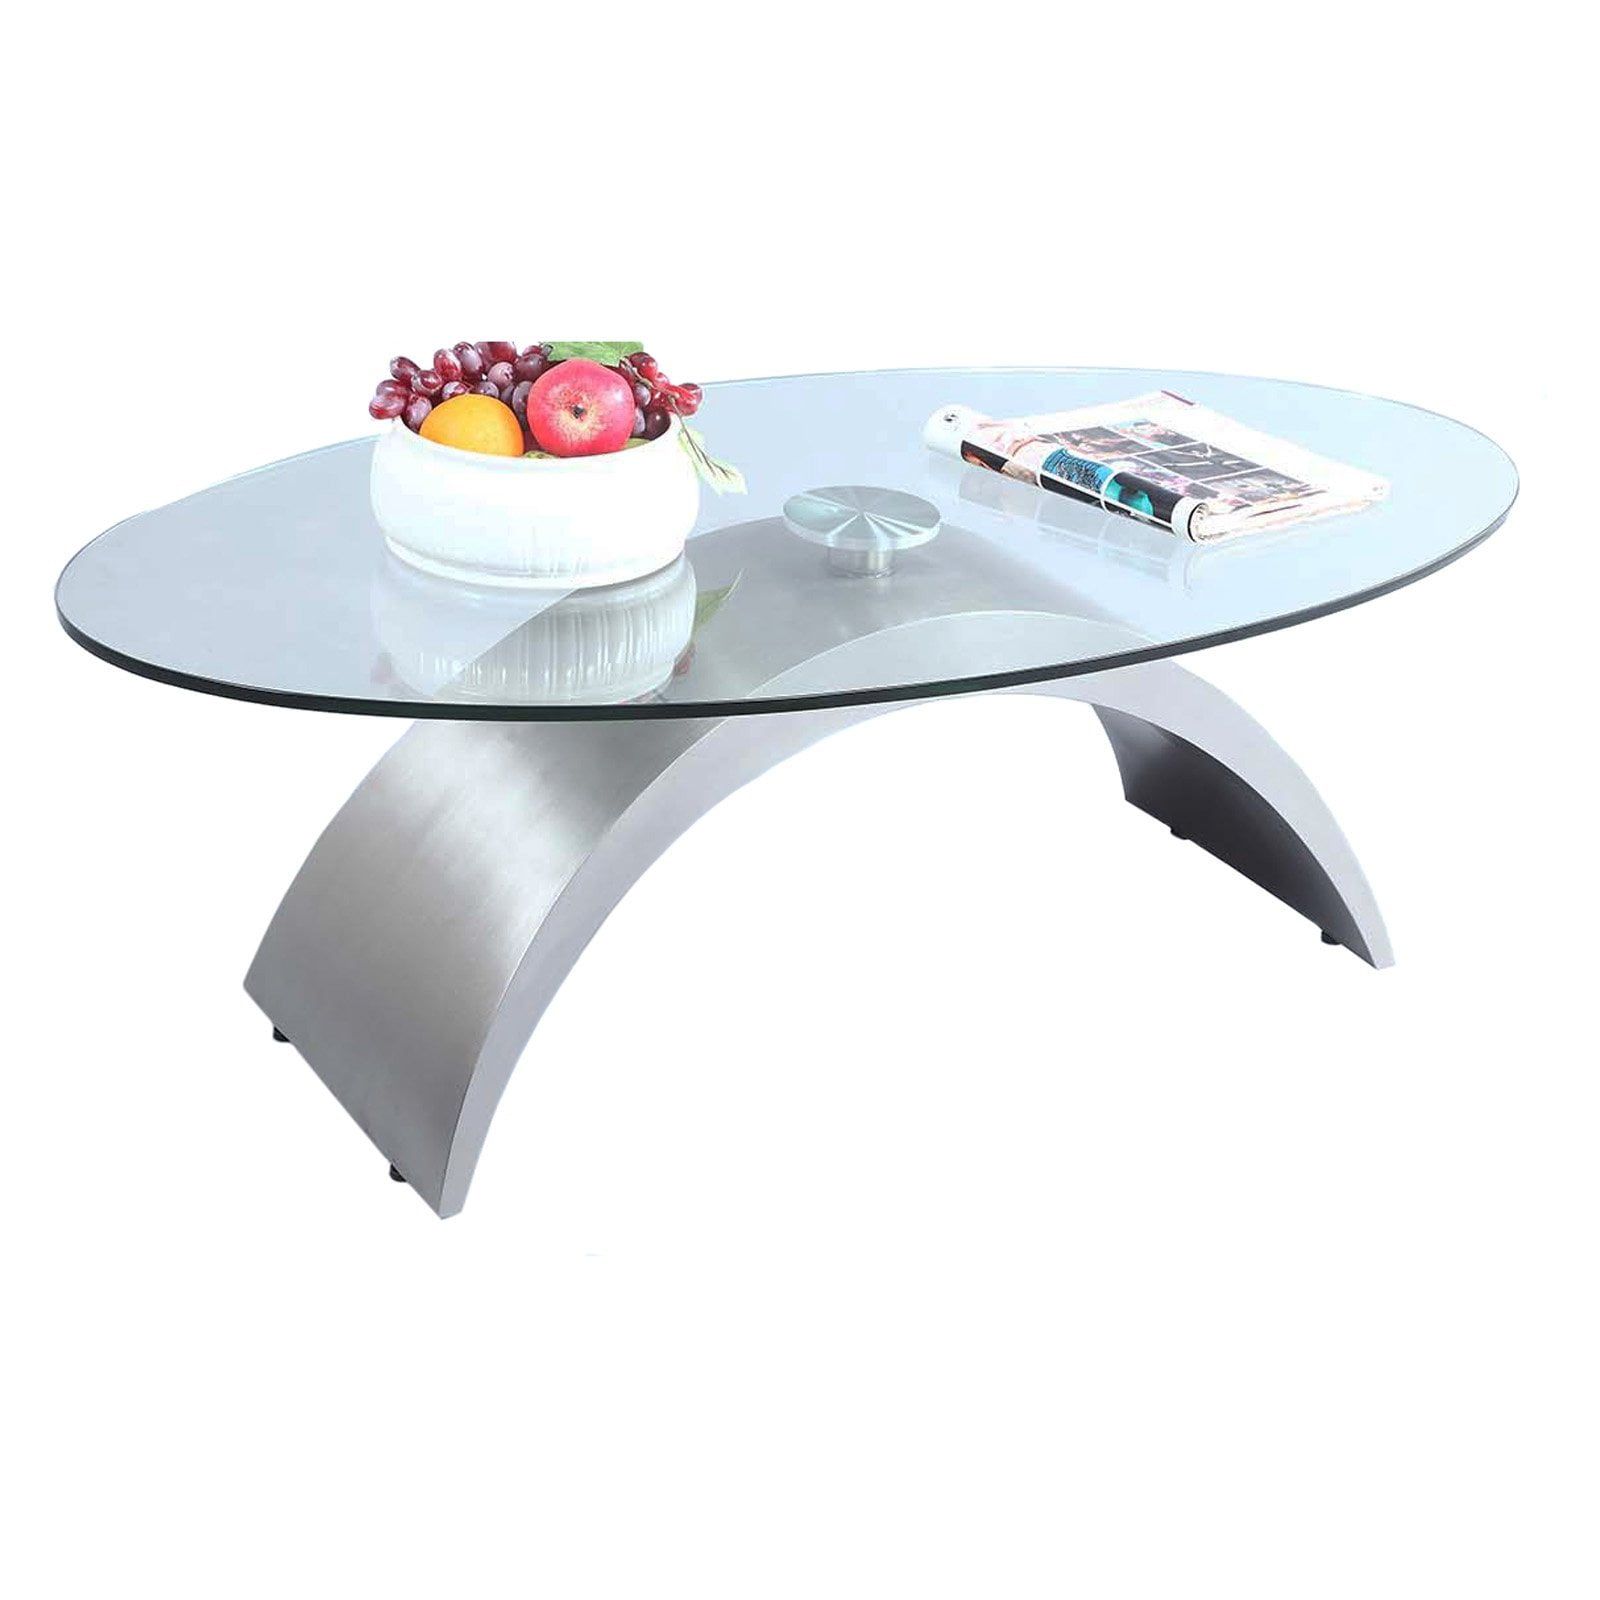 Chintaly Oval Glass Top Coffee Table – Walmart With Regard To Oval Glass Coffee Tables (View 19 of 20)